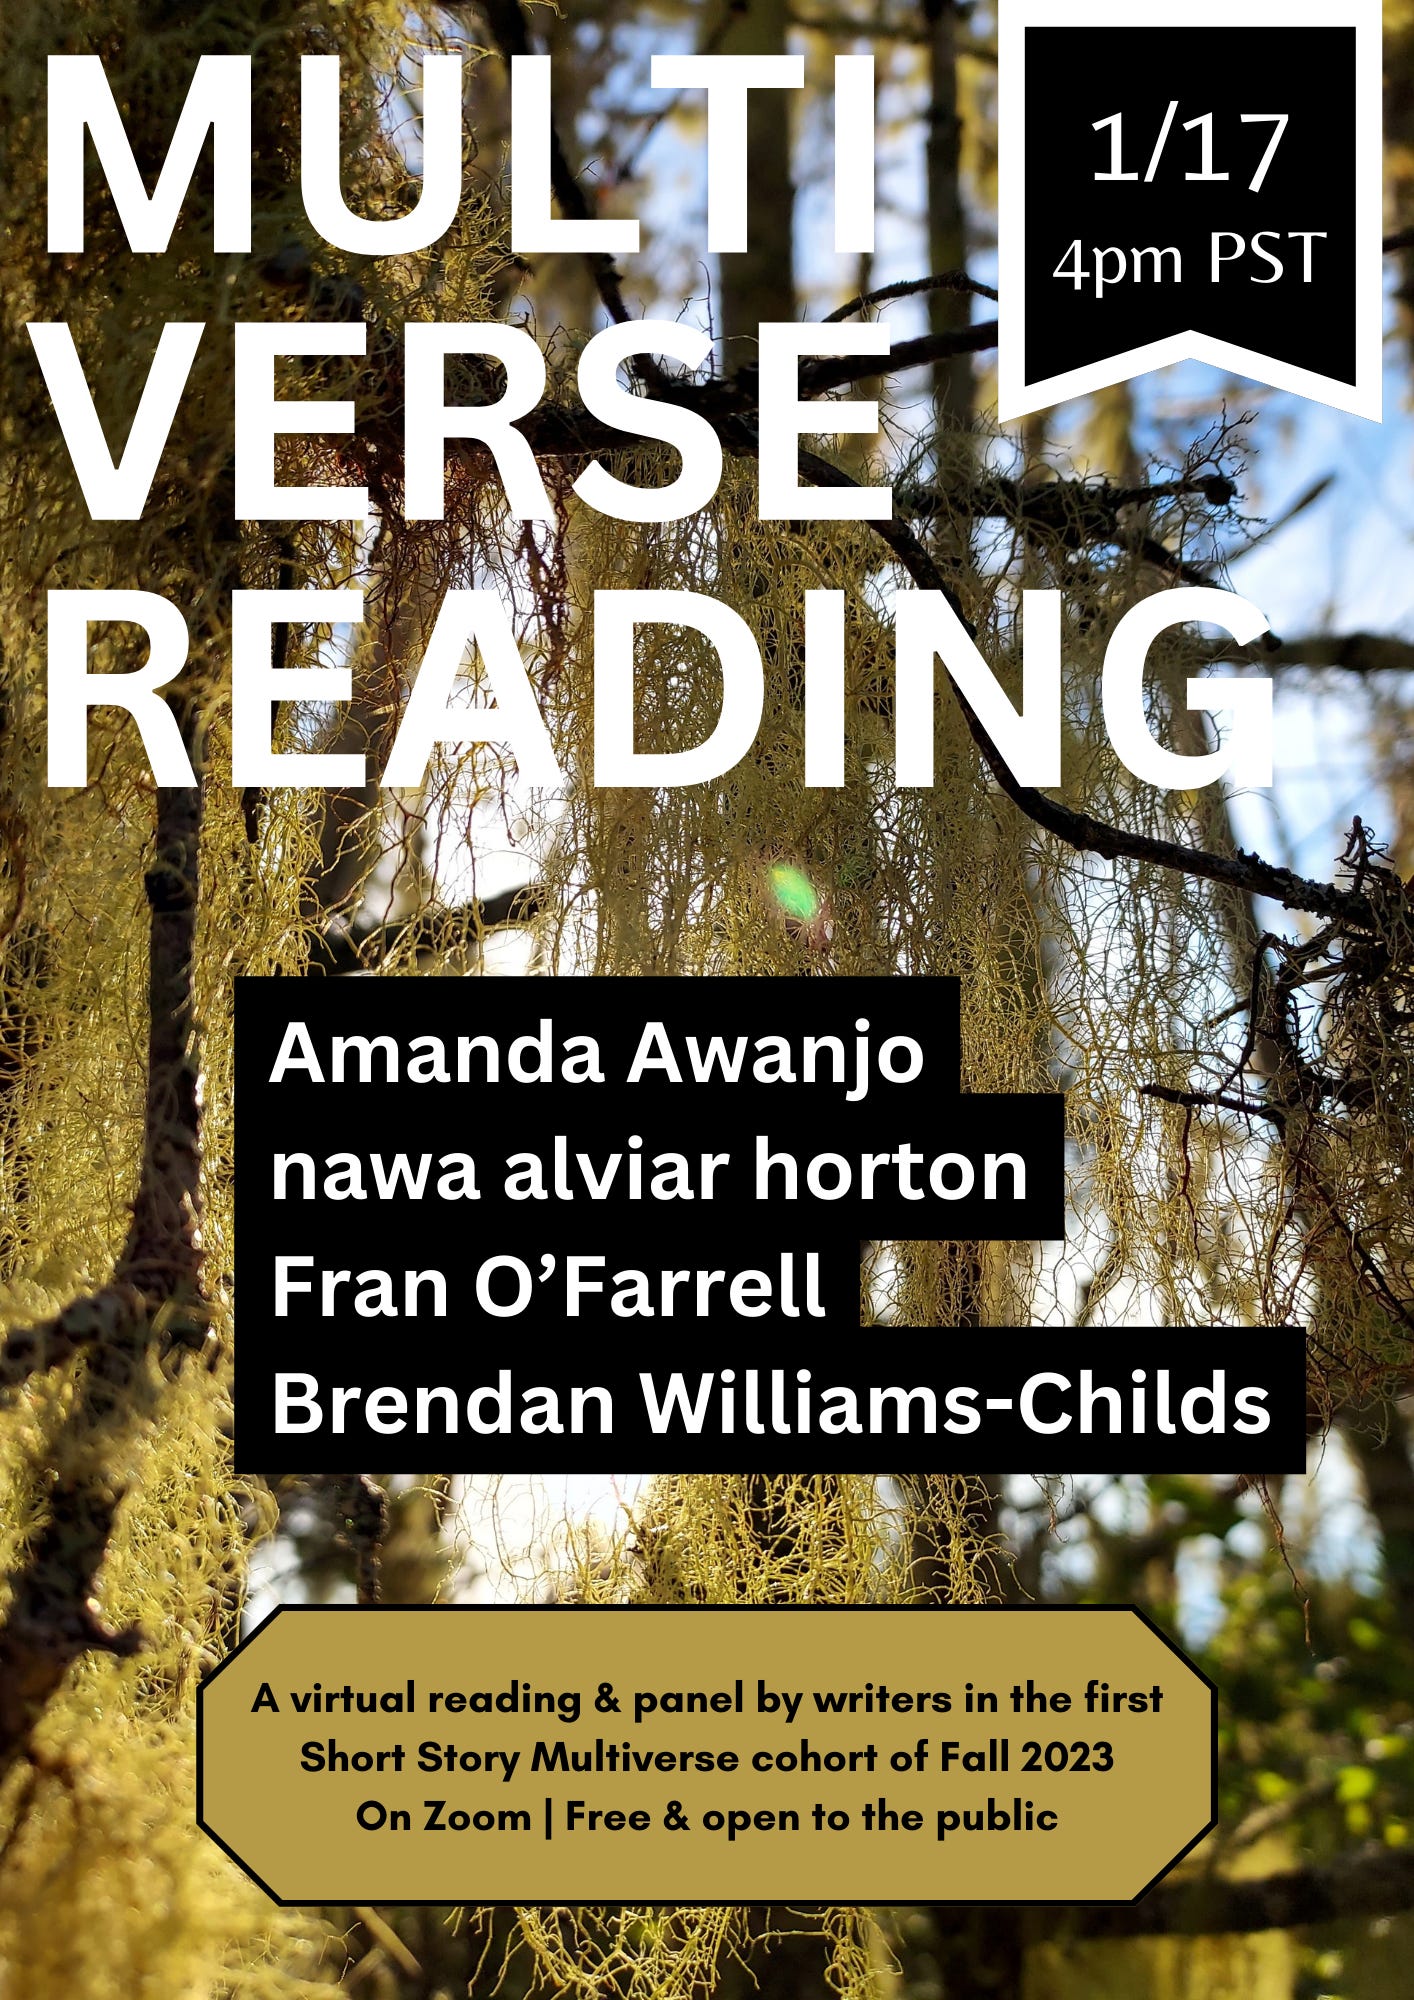 Event flyer features background image of sunlight streaming through lichen in tree branches, over which reads, in large all caps white text “MULTI VERSE READING.” Below this are the names of readers in white text on black background, in alphabetical order: Amanda Awanjo, nada alviar Horton, Fran O’Farrell, Brendan Williams-Childs. At bottom in black text on beige background it reads “A virtual reading & panel by writers in the first Short Story Multiverse cohort of Fall 2023, On Zoom, Free & open to the public.” 